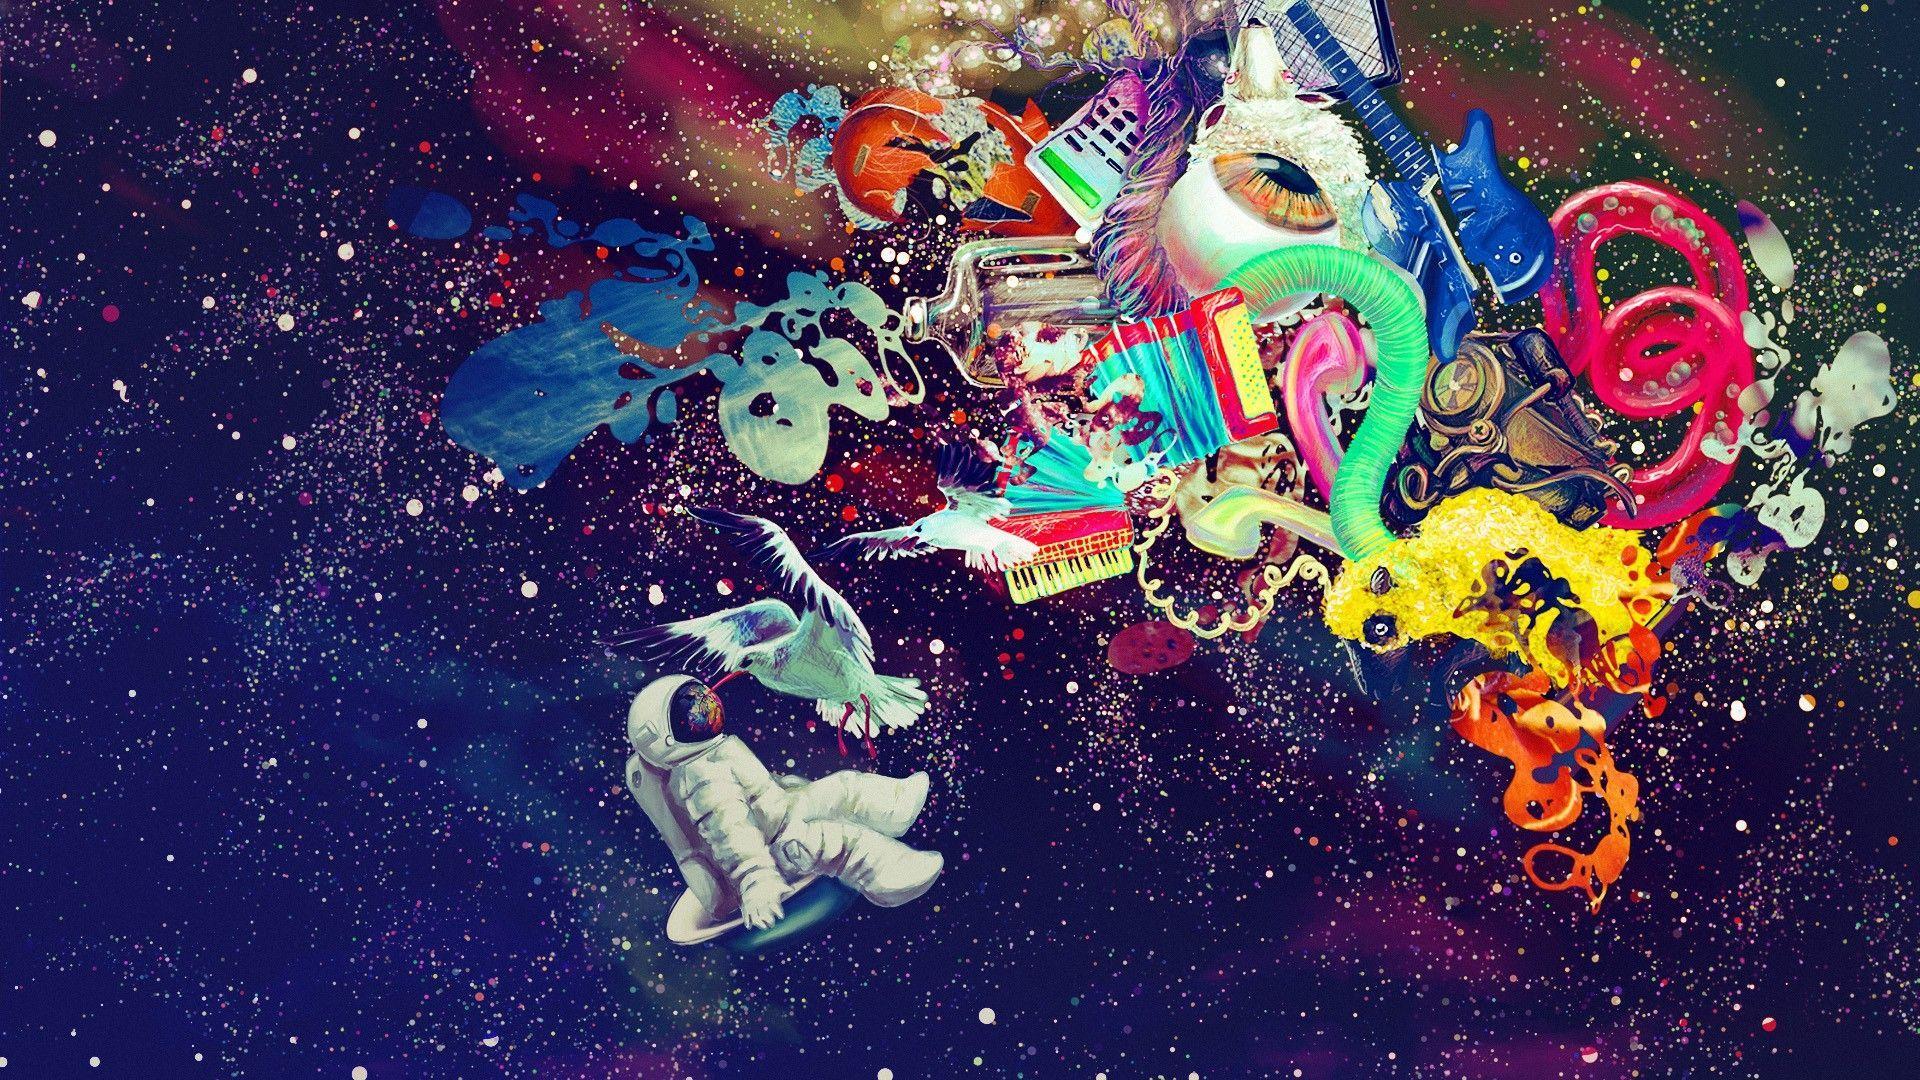 Sci fi astronaut abstract mind teaser psychedelic space stars color wallpaperx1080. Trippy wallpaper, Psychedelic space, Trippy iphone wallpaper